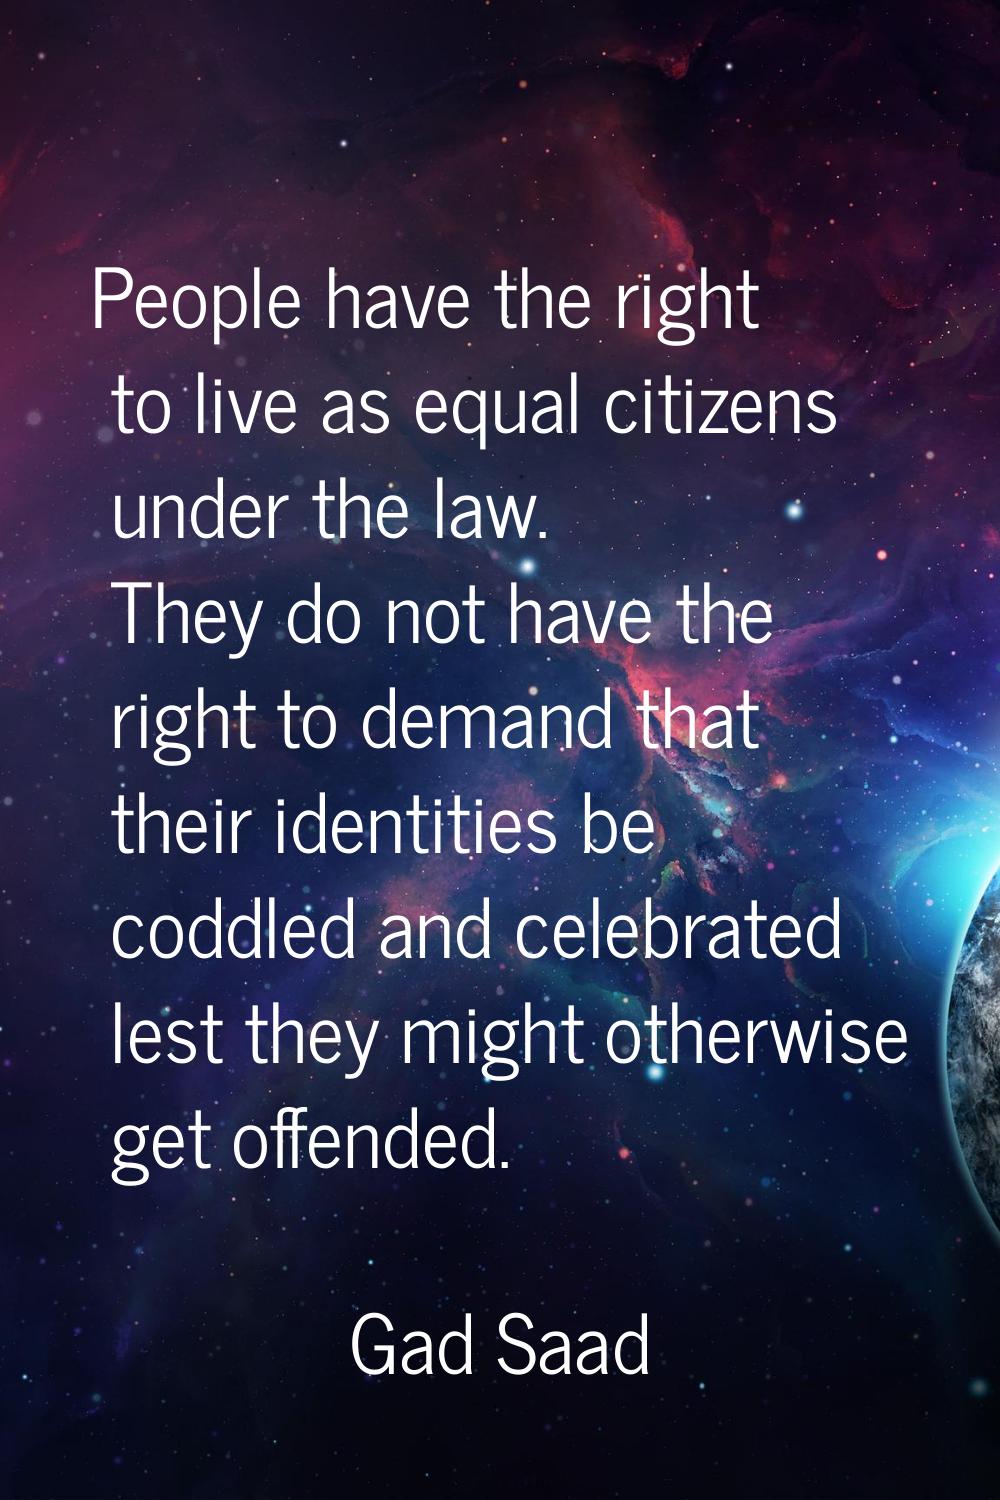 People have the right to live as equal citizens under the law. They do not have the right to demand